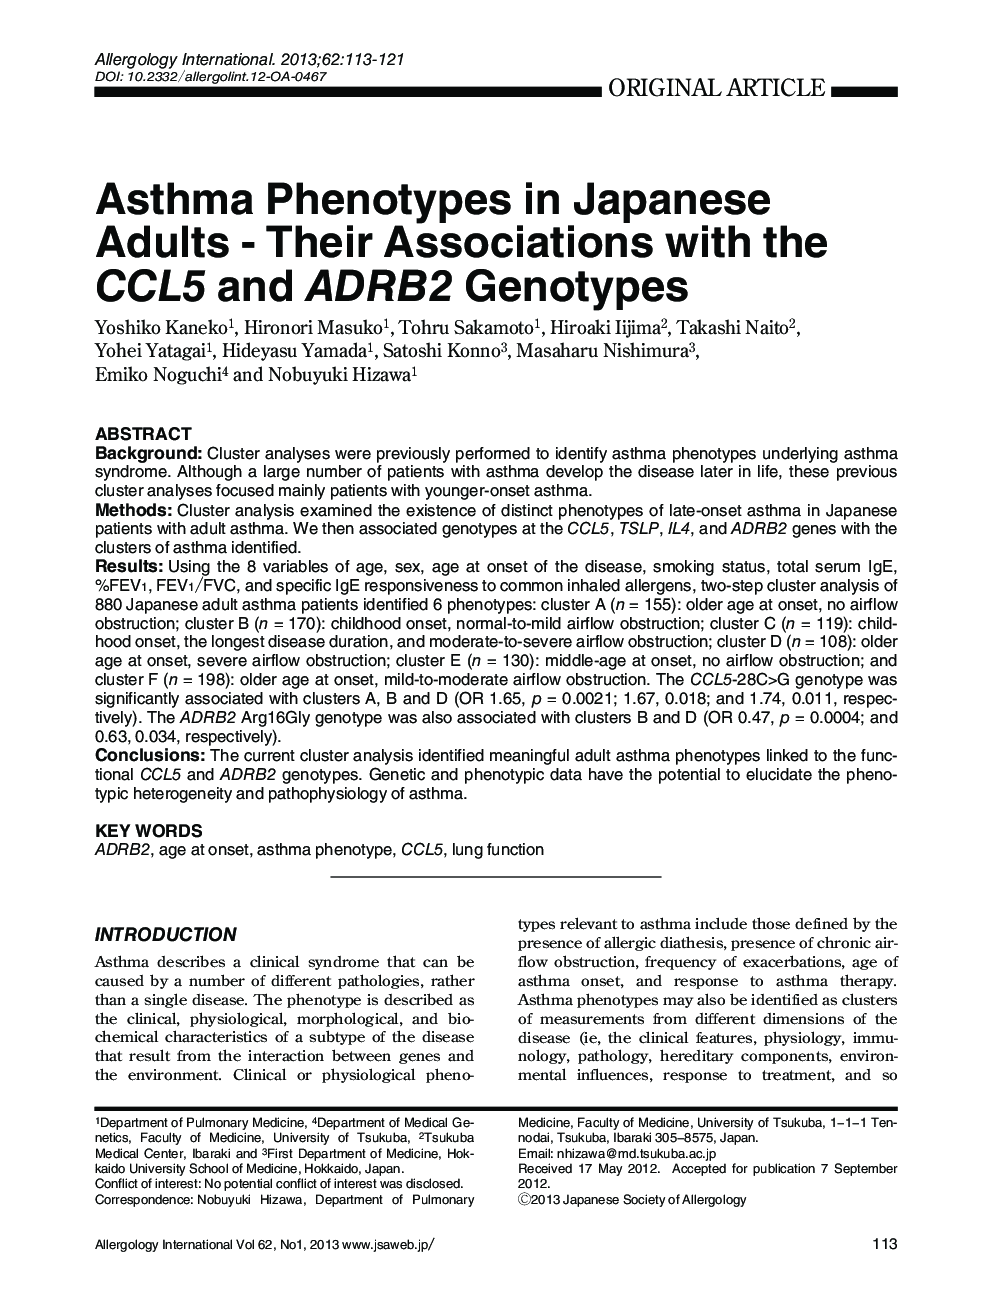 Asthma Phenotypes in Japanese Adults - Their Associations with the CCL5 ADRB2 Genotypes 